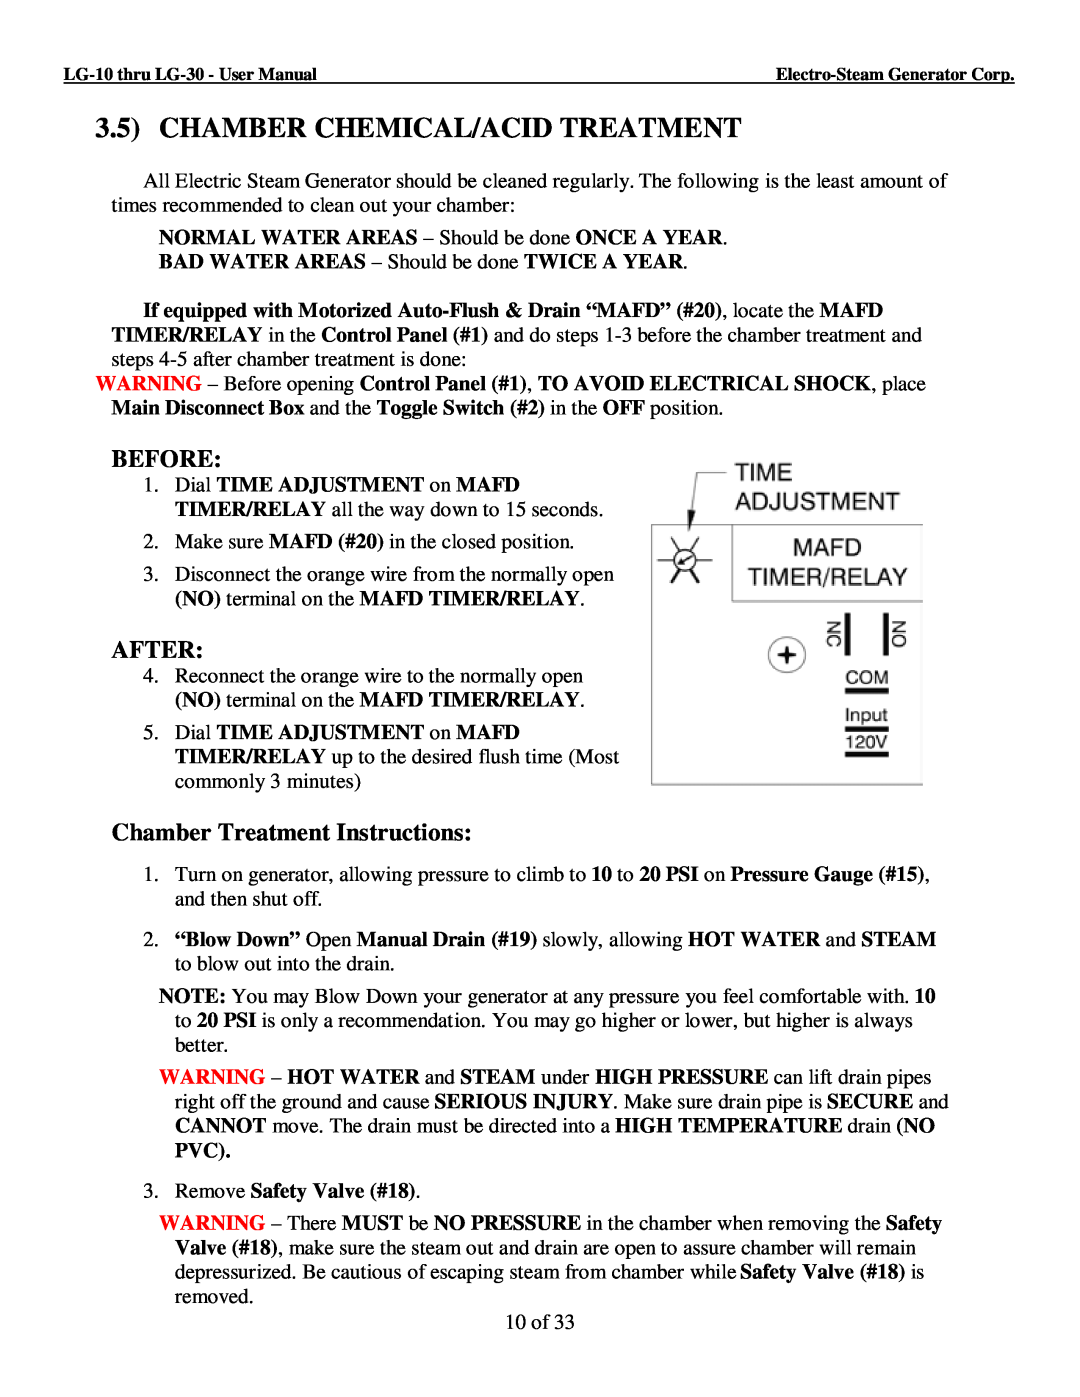 LG Electronics 30, 10 user manual Chamber Chemical/Acid Treatment, Before, After, Chamber Treatment Instructions 